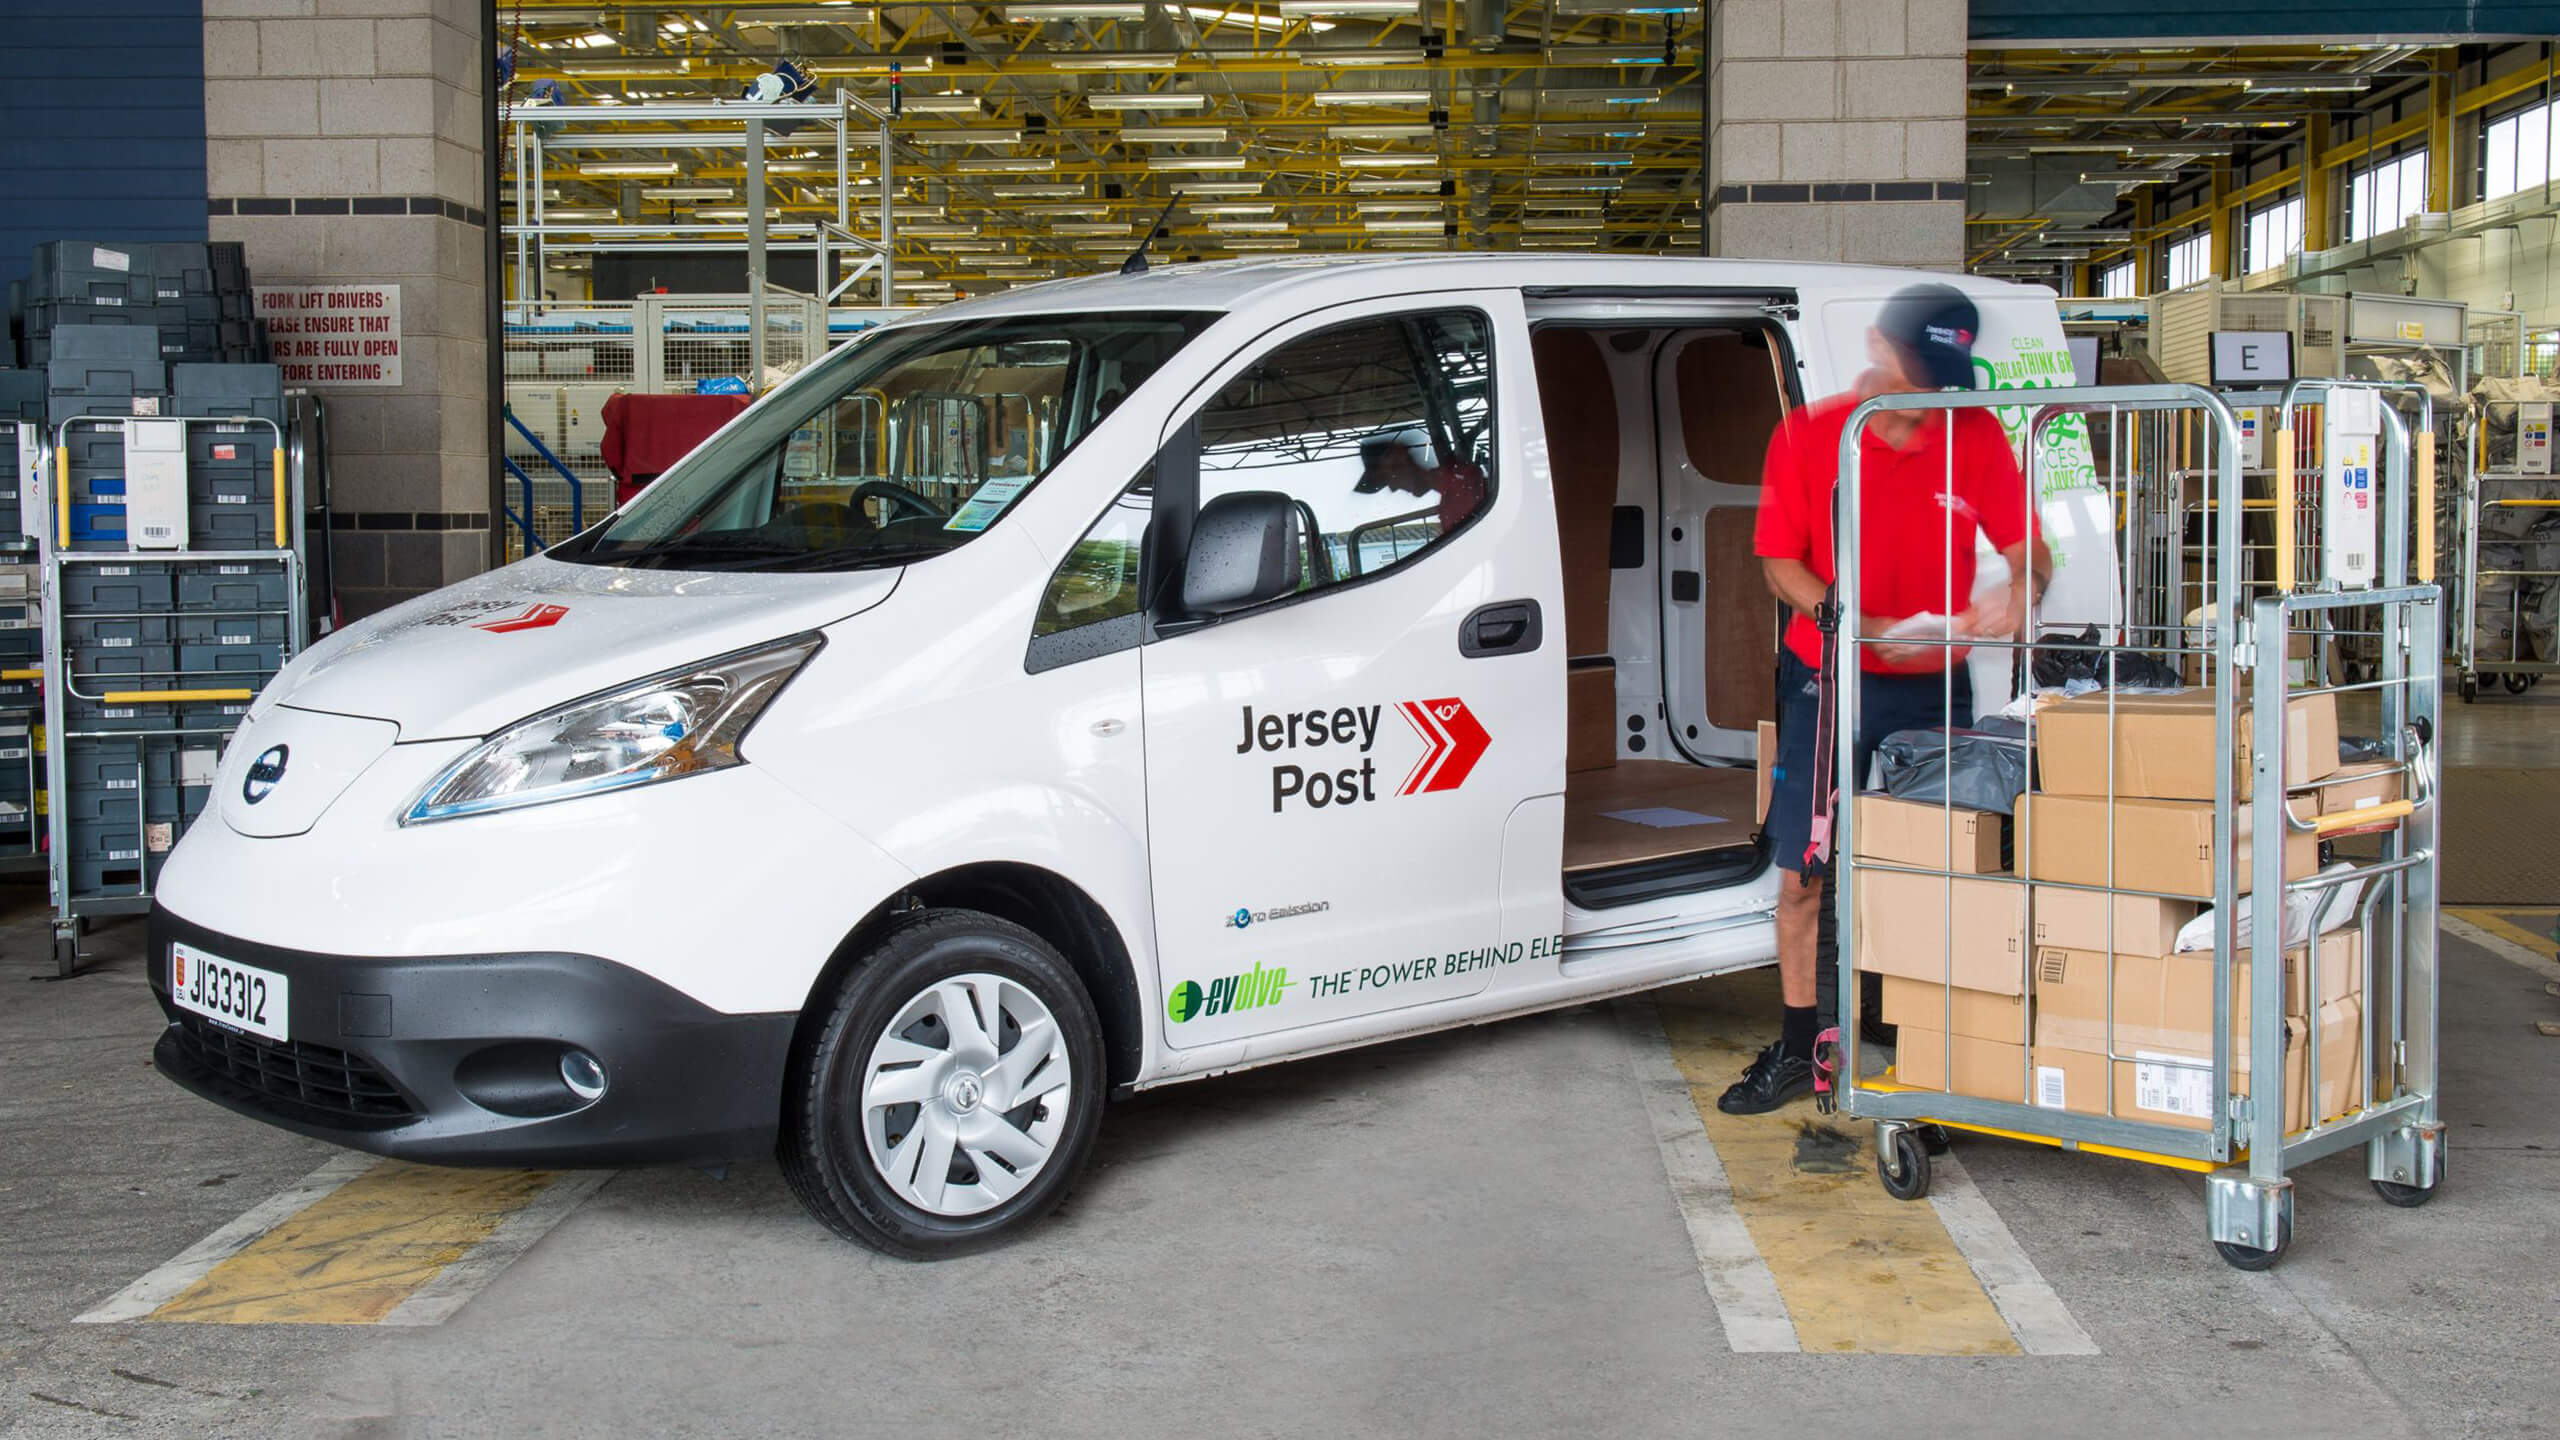 Jersey Post van being loaded ready for deliveries